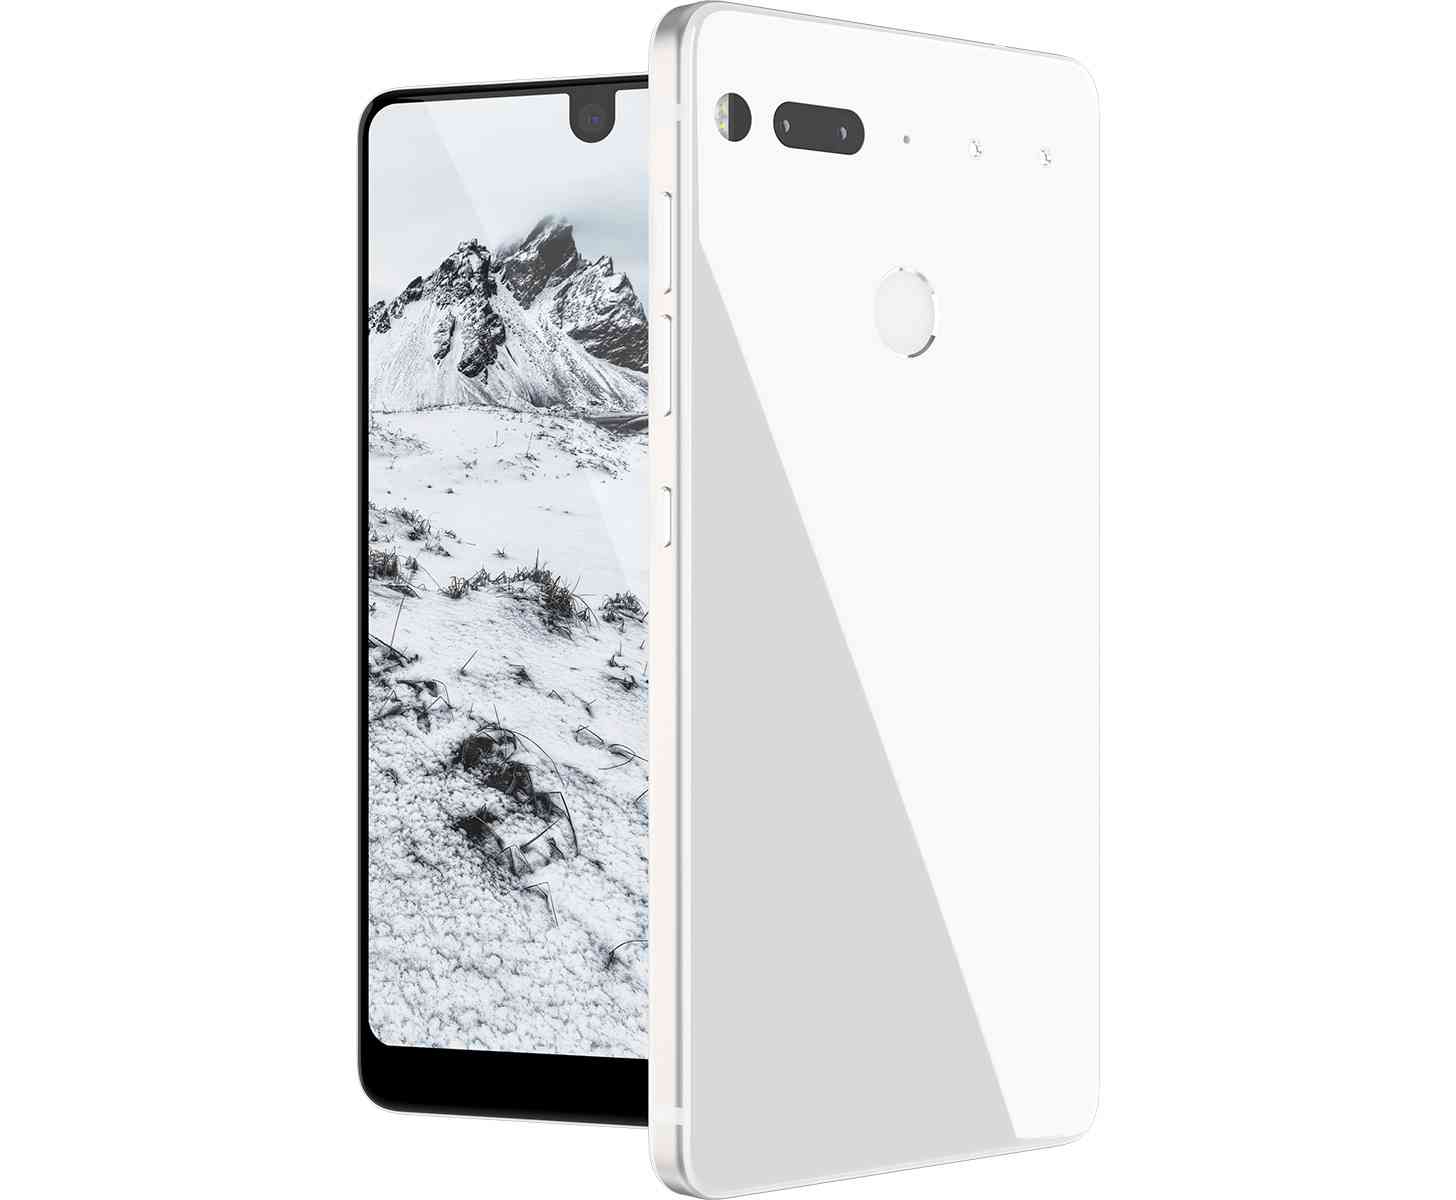 Essential Phone PH-1 white official